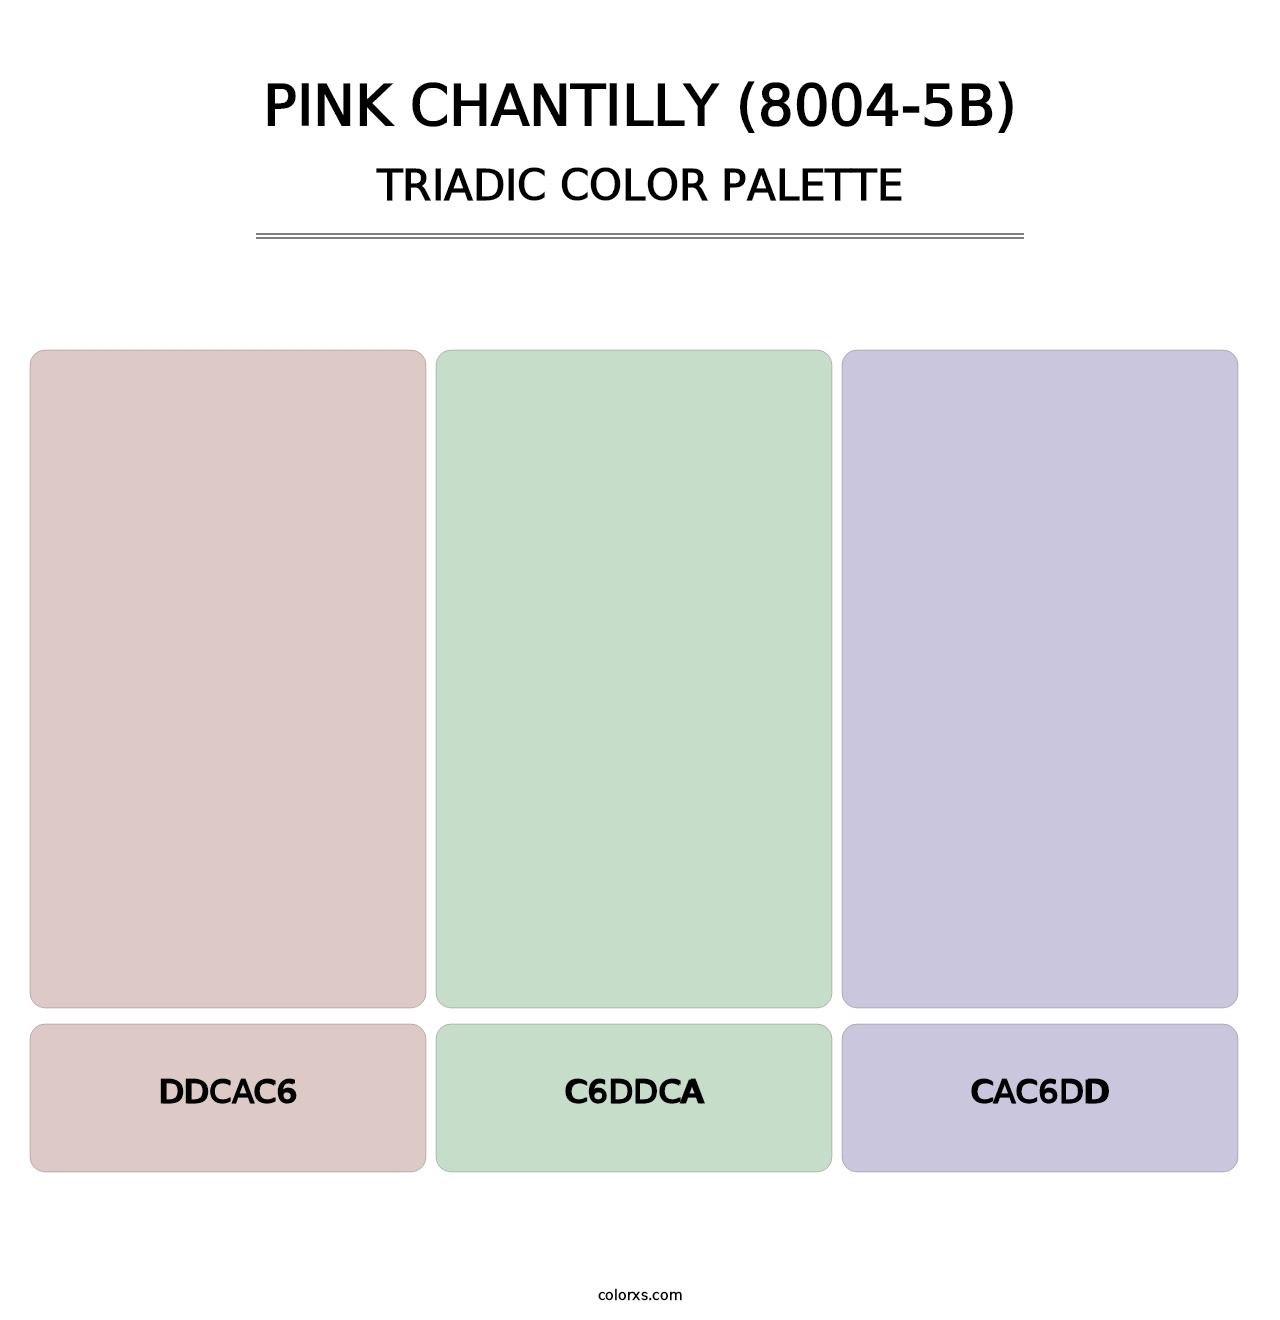 Pink Chantilly (8004-5B) - Triadic Color Palette